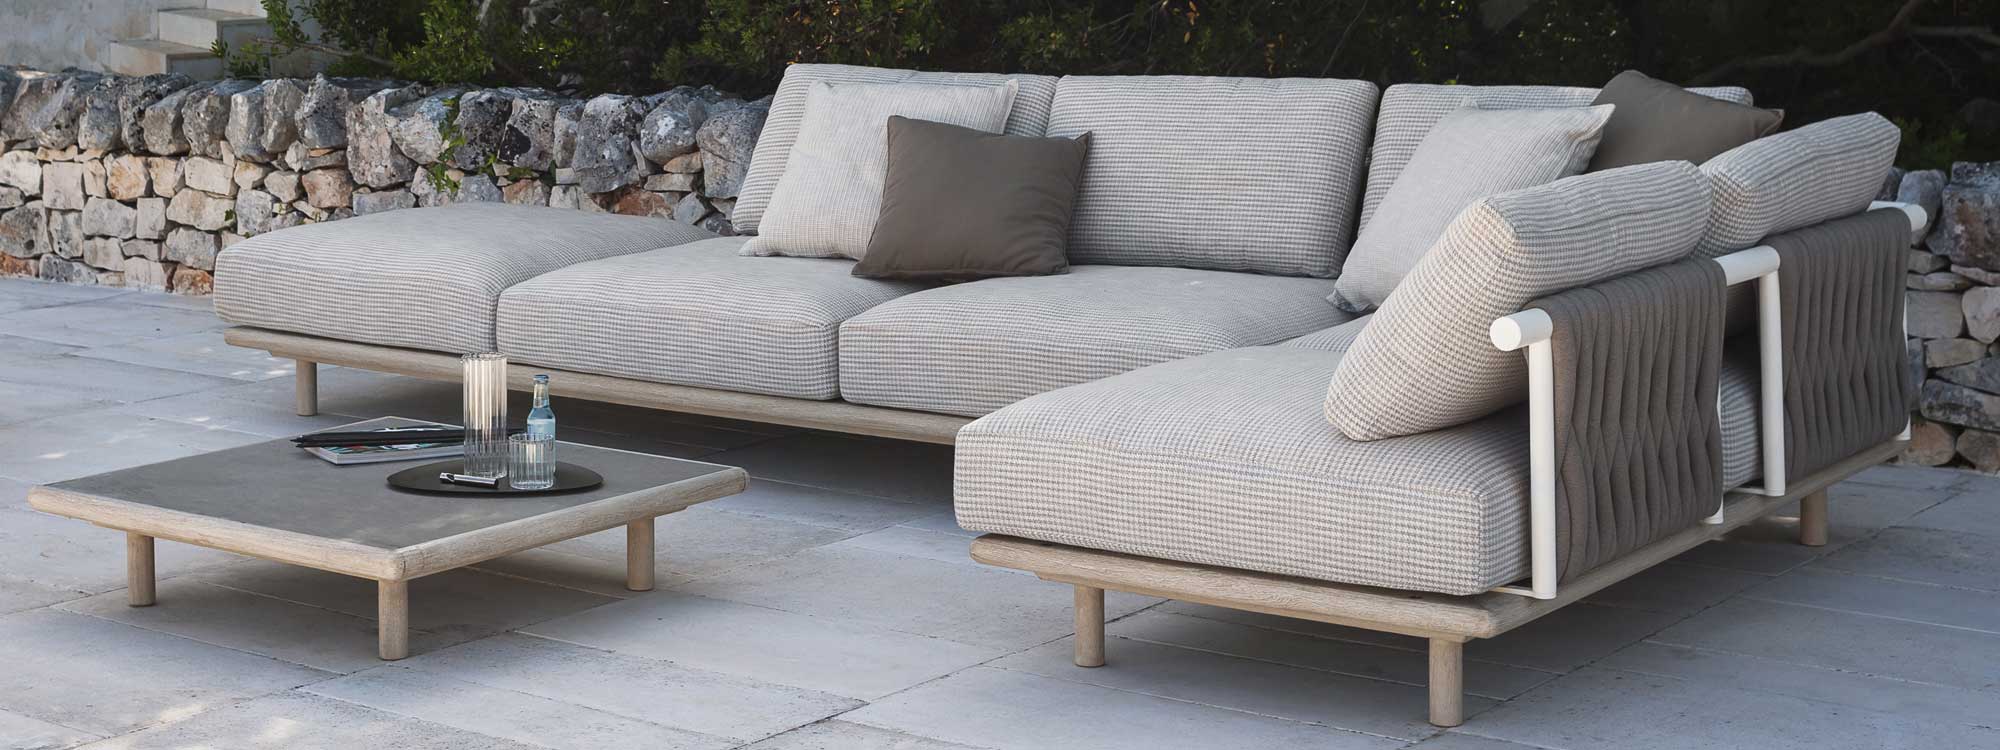 Image of RODA Eden outdoor corner sofa with white-washed teak base and luxury cushions, with low table with farsena natural stone table top